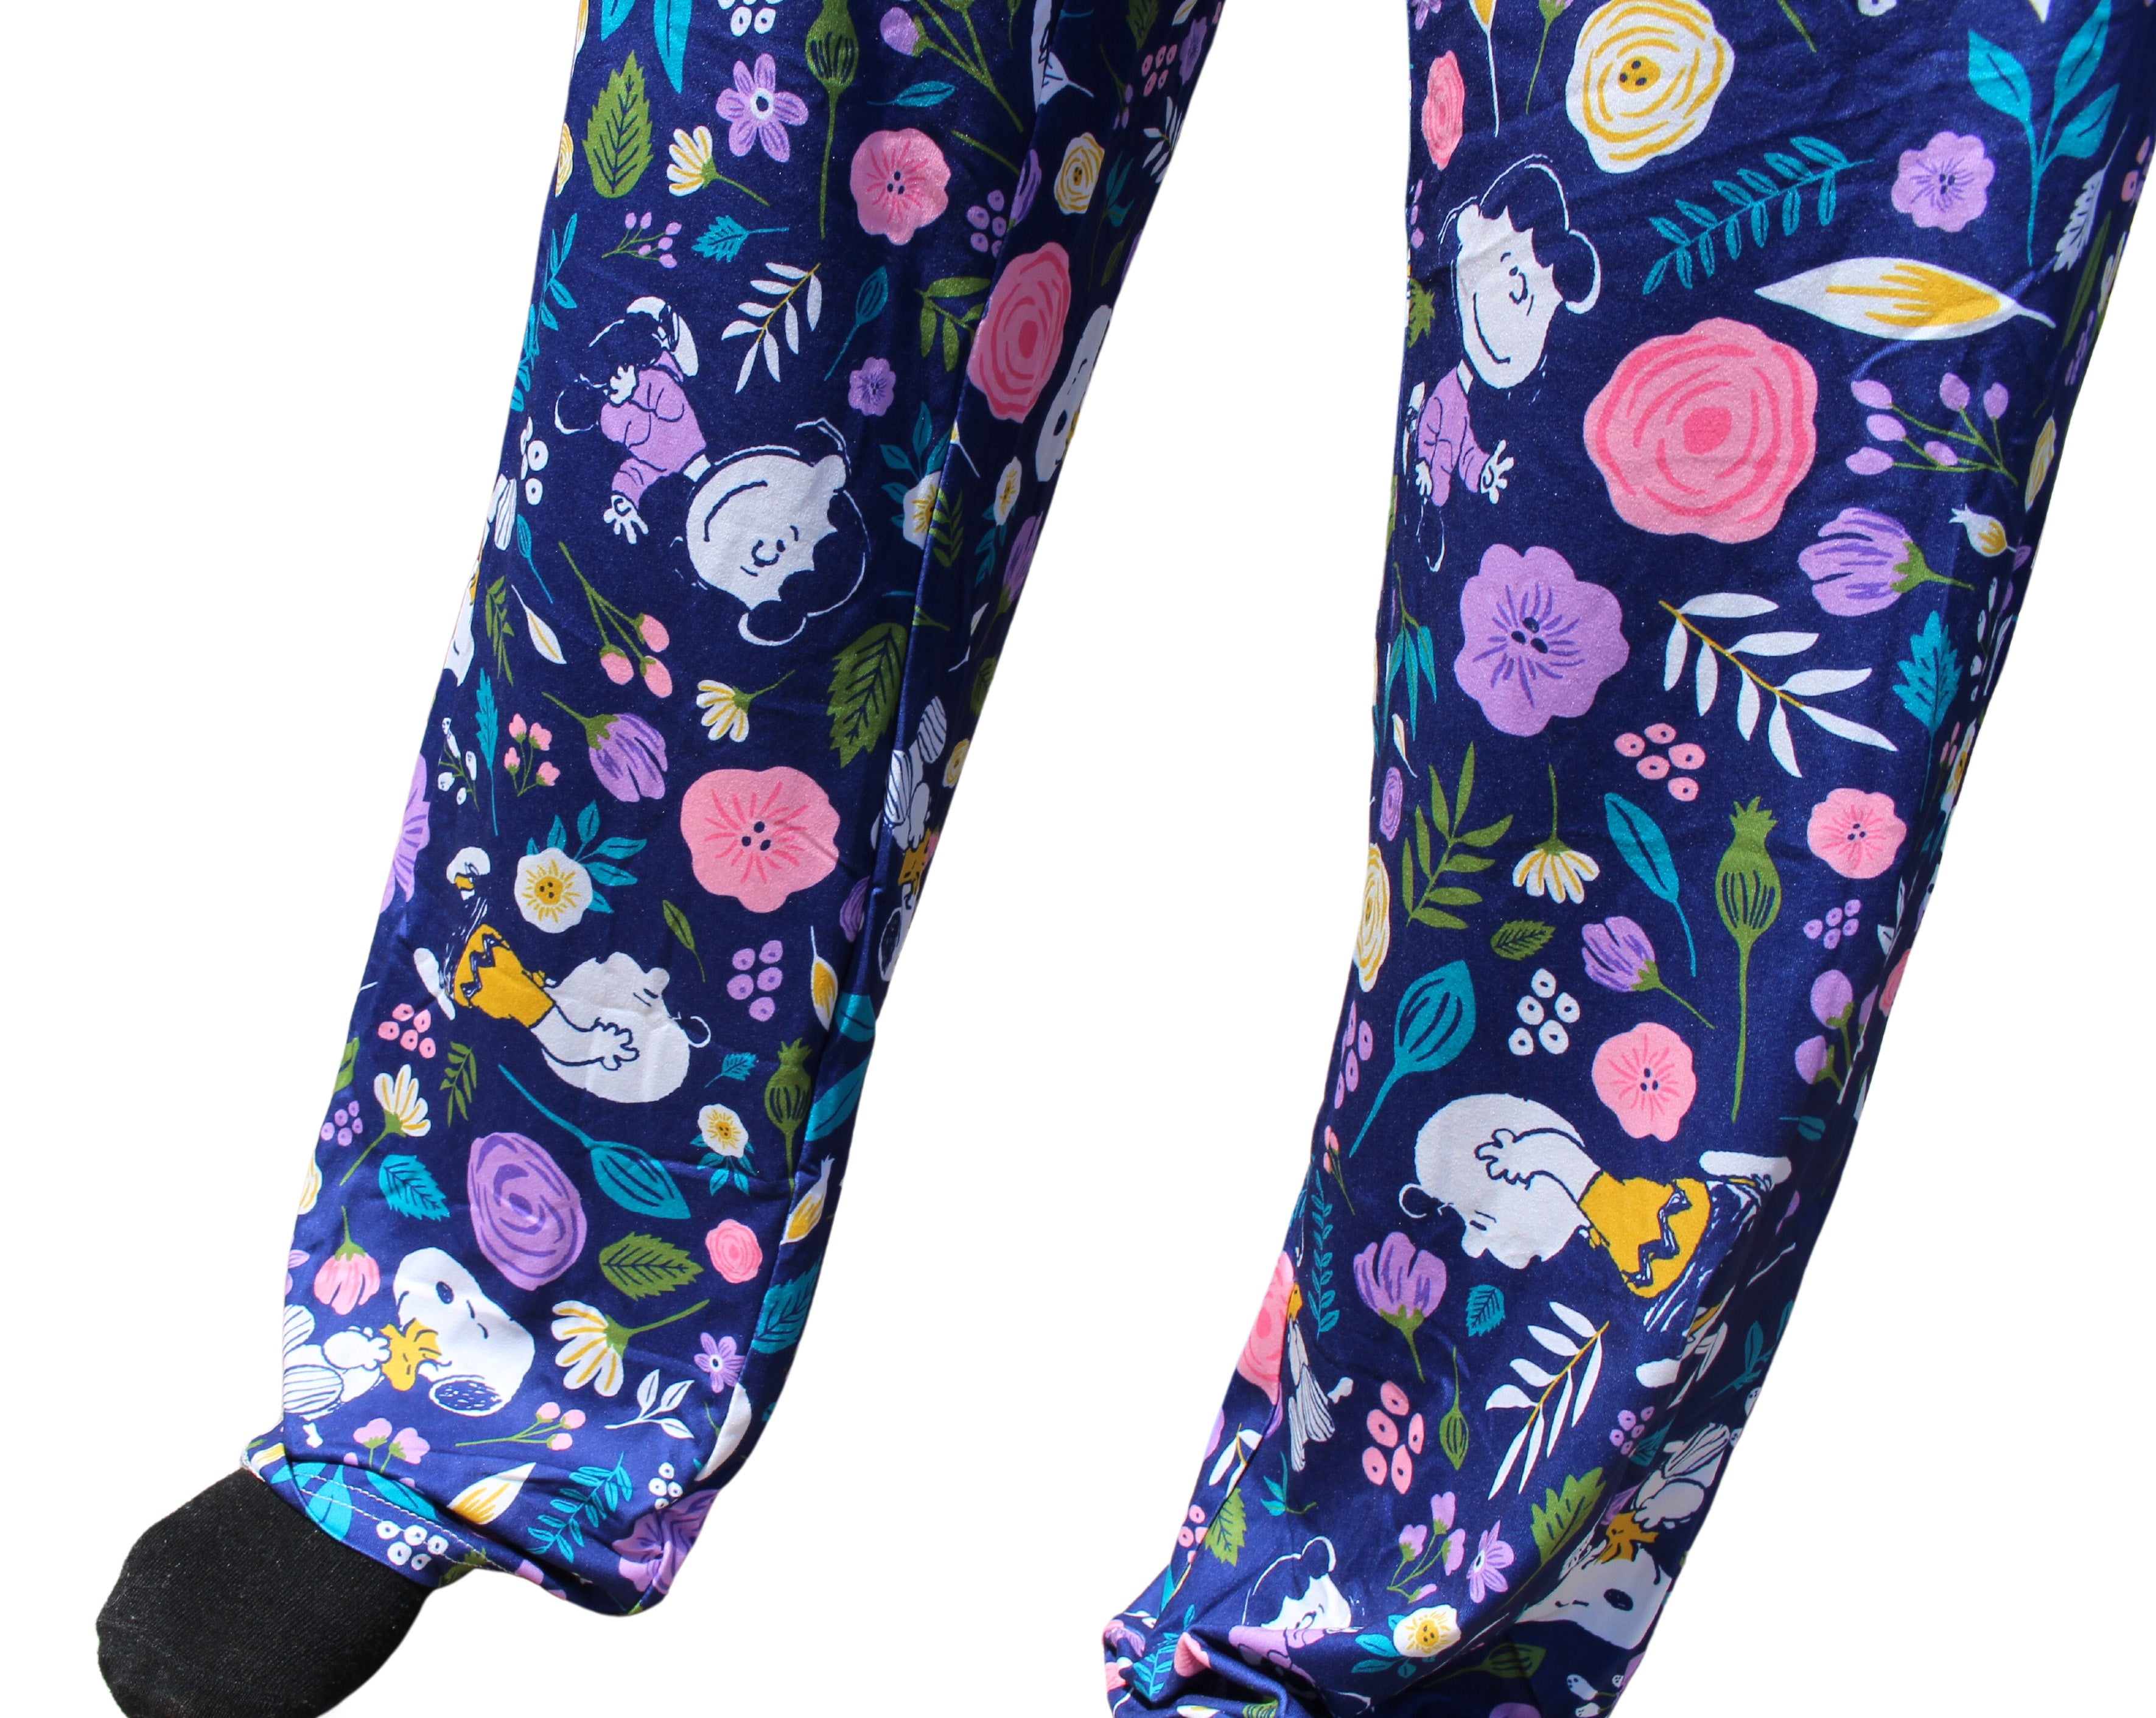 Snoopy Floral Love pajama lounge pants on model close up view of graphic pattern at bottom of legs